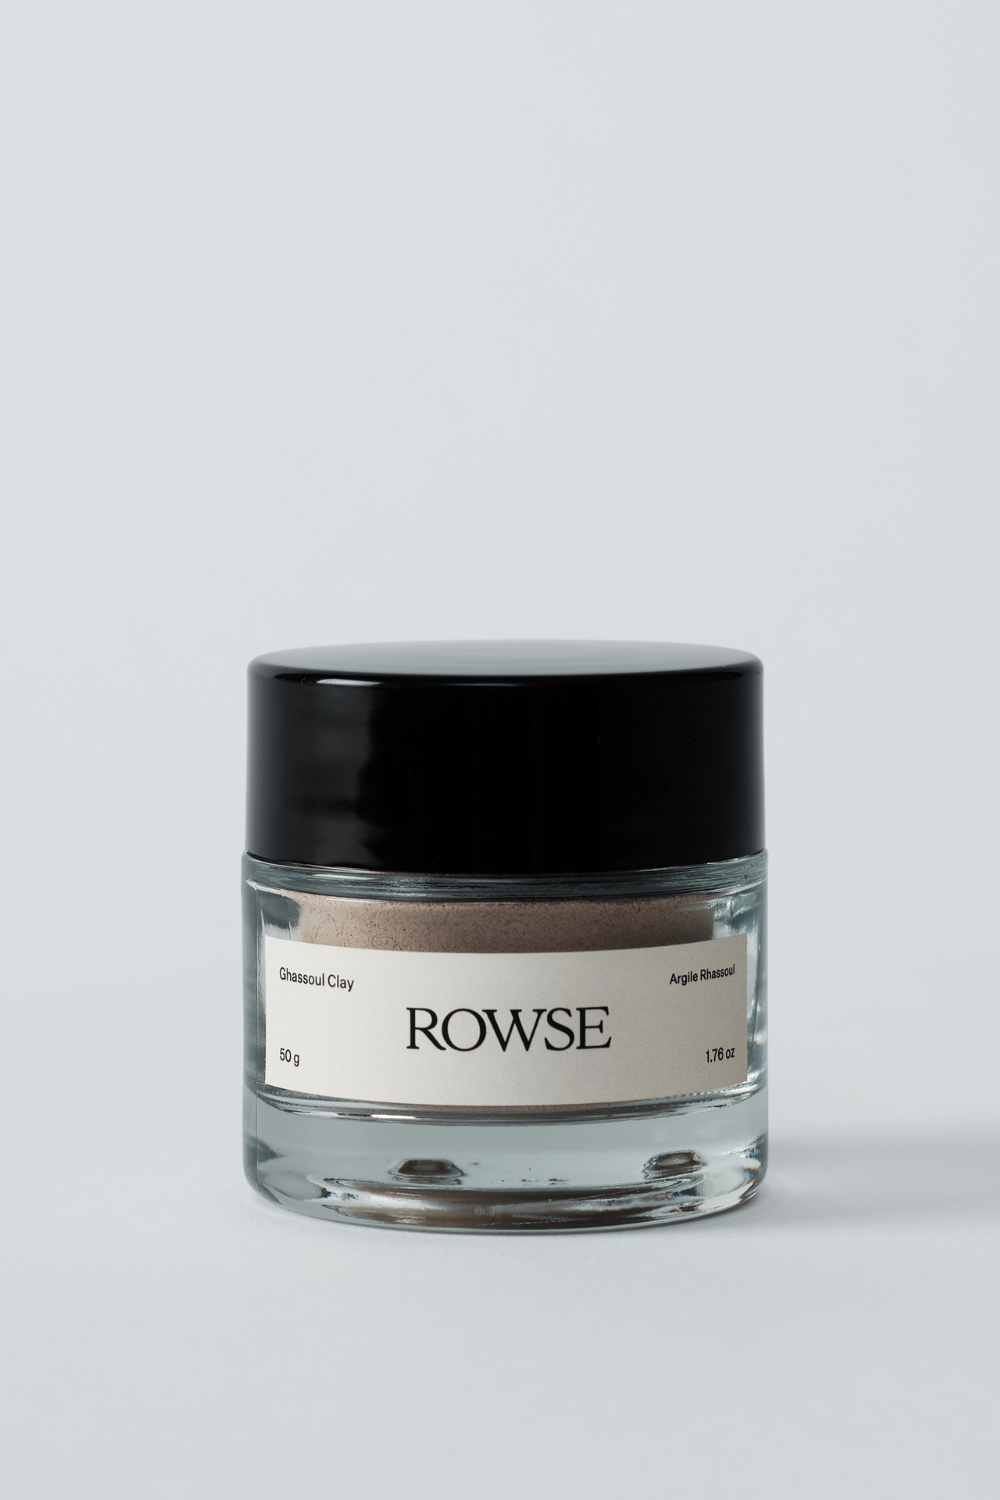 ROWSE GHASSOUL CLAY